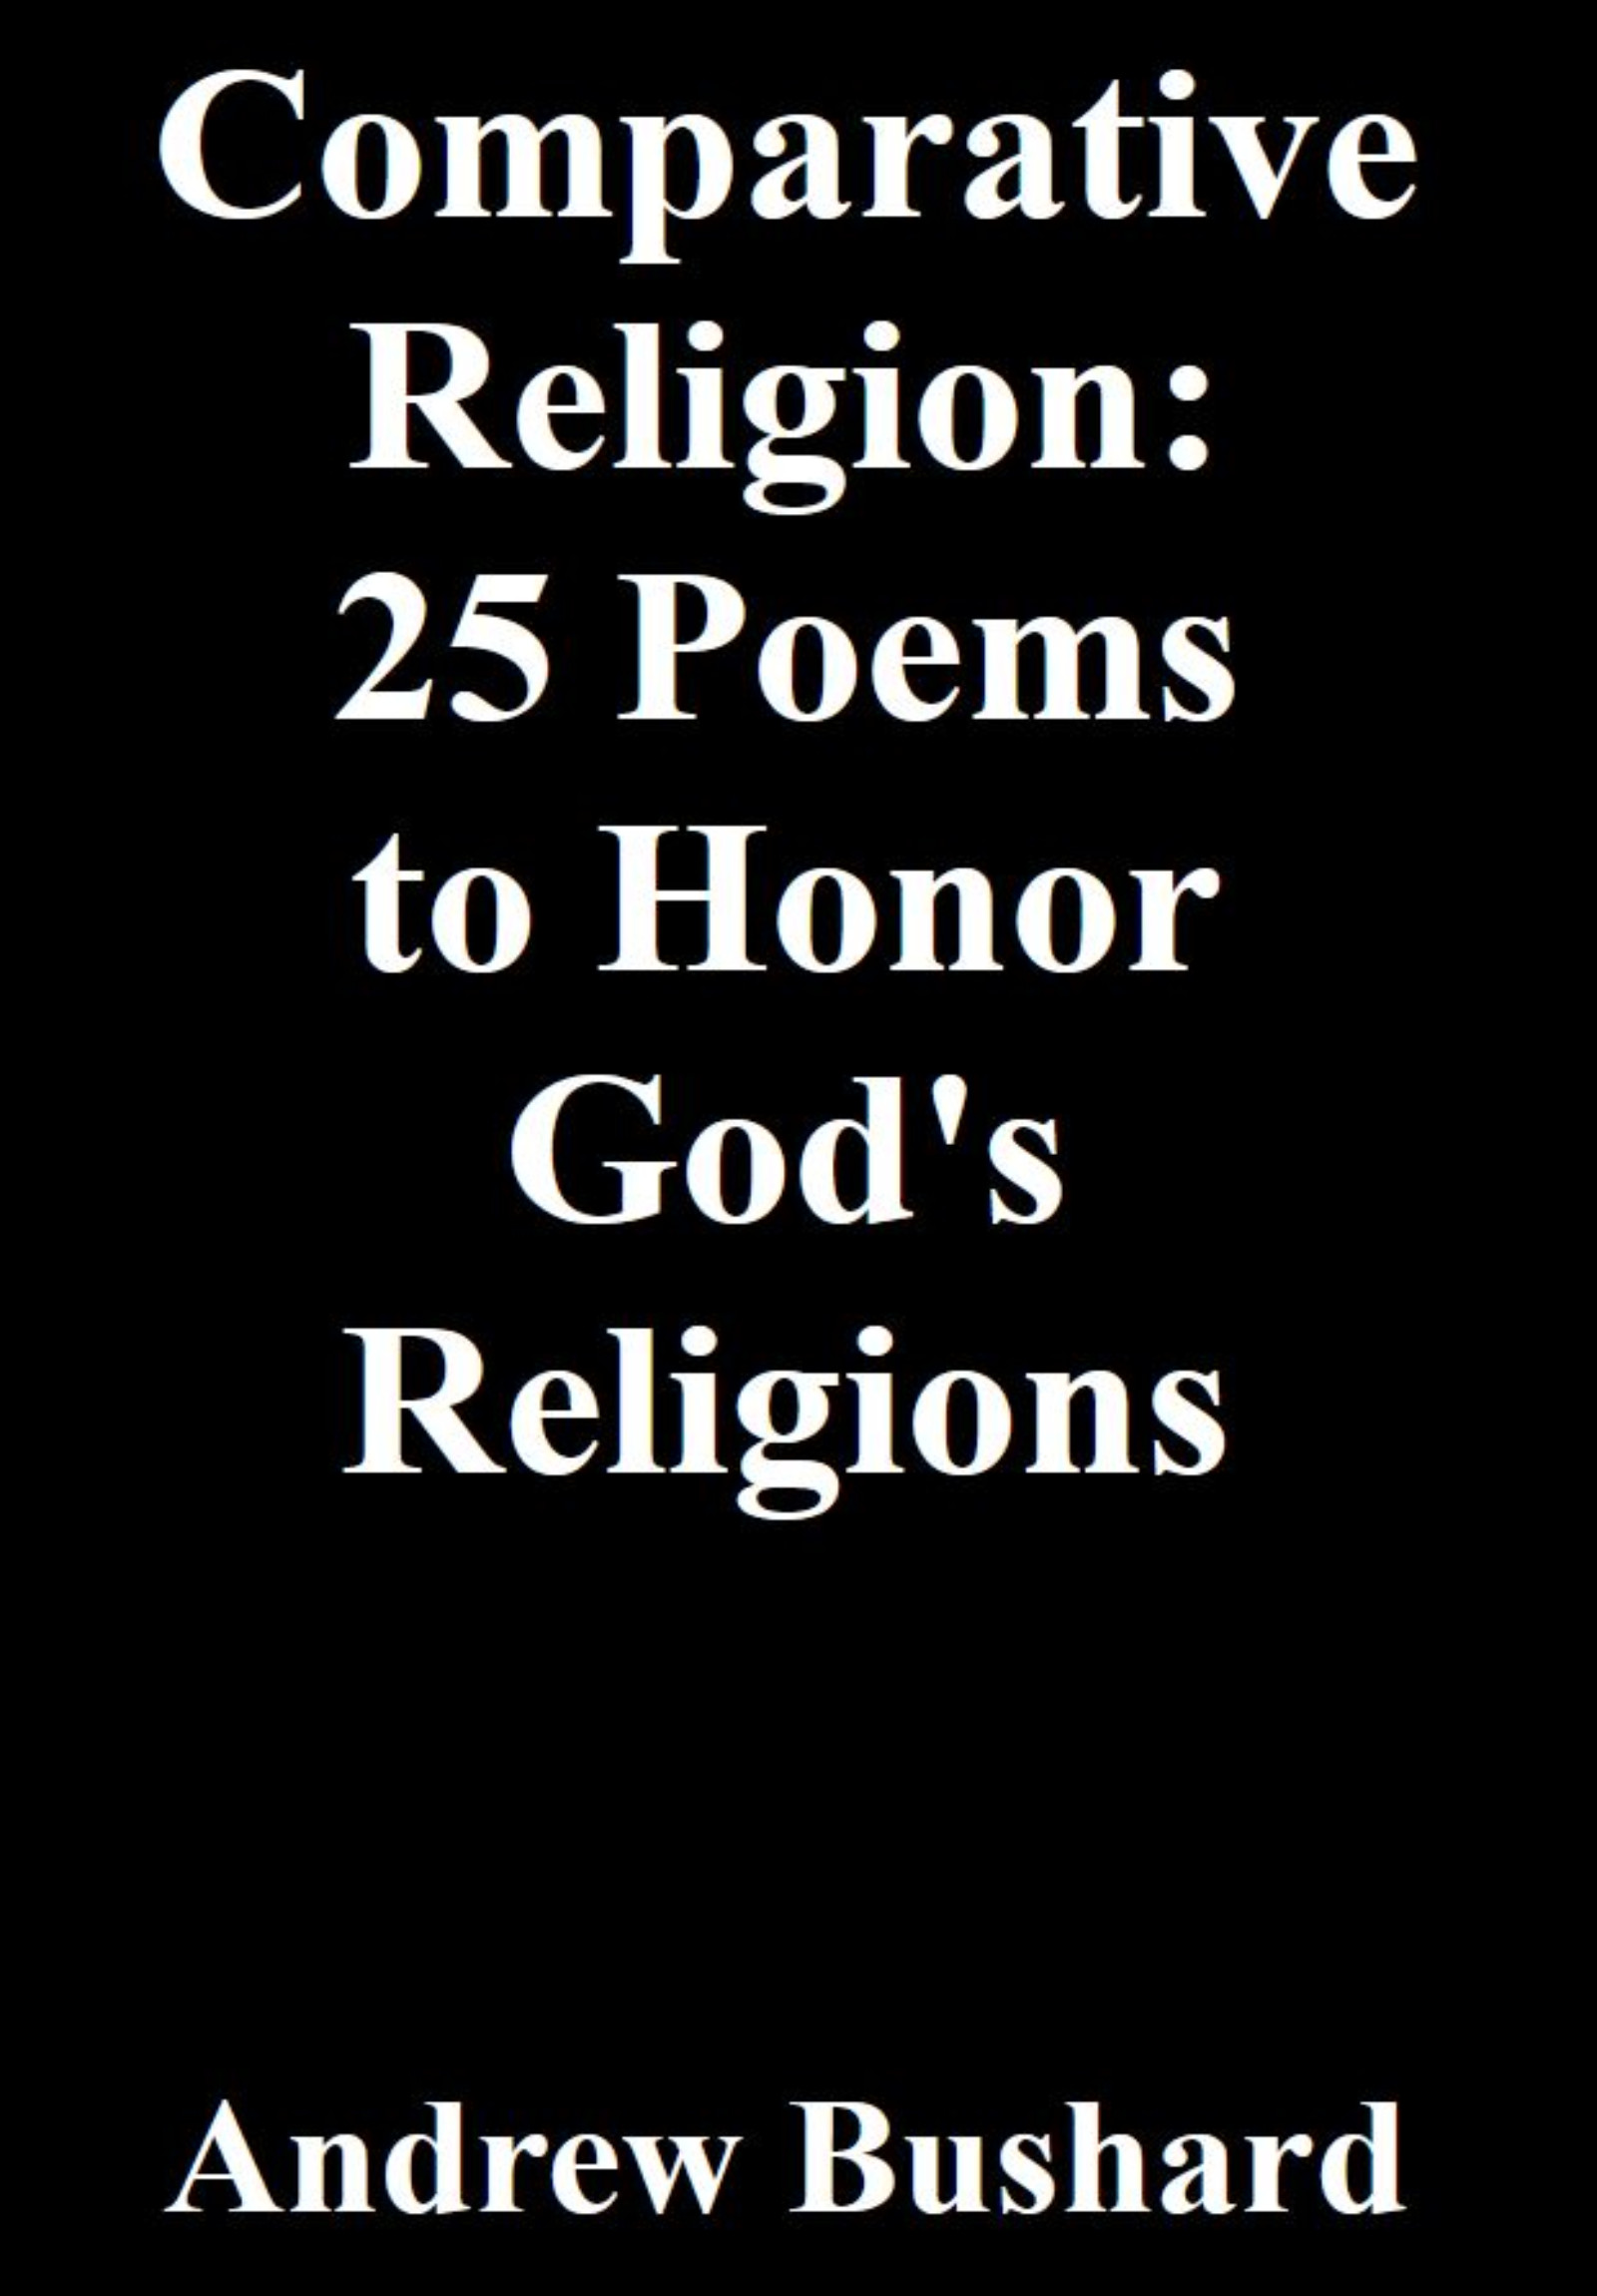 Comparative Religion: 25 Poems to Honor God's Religions's featured image